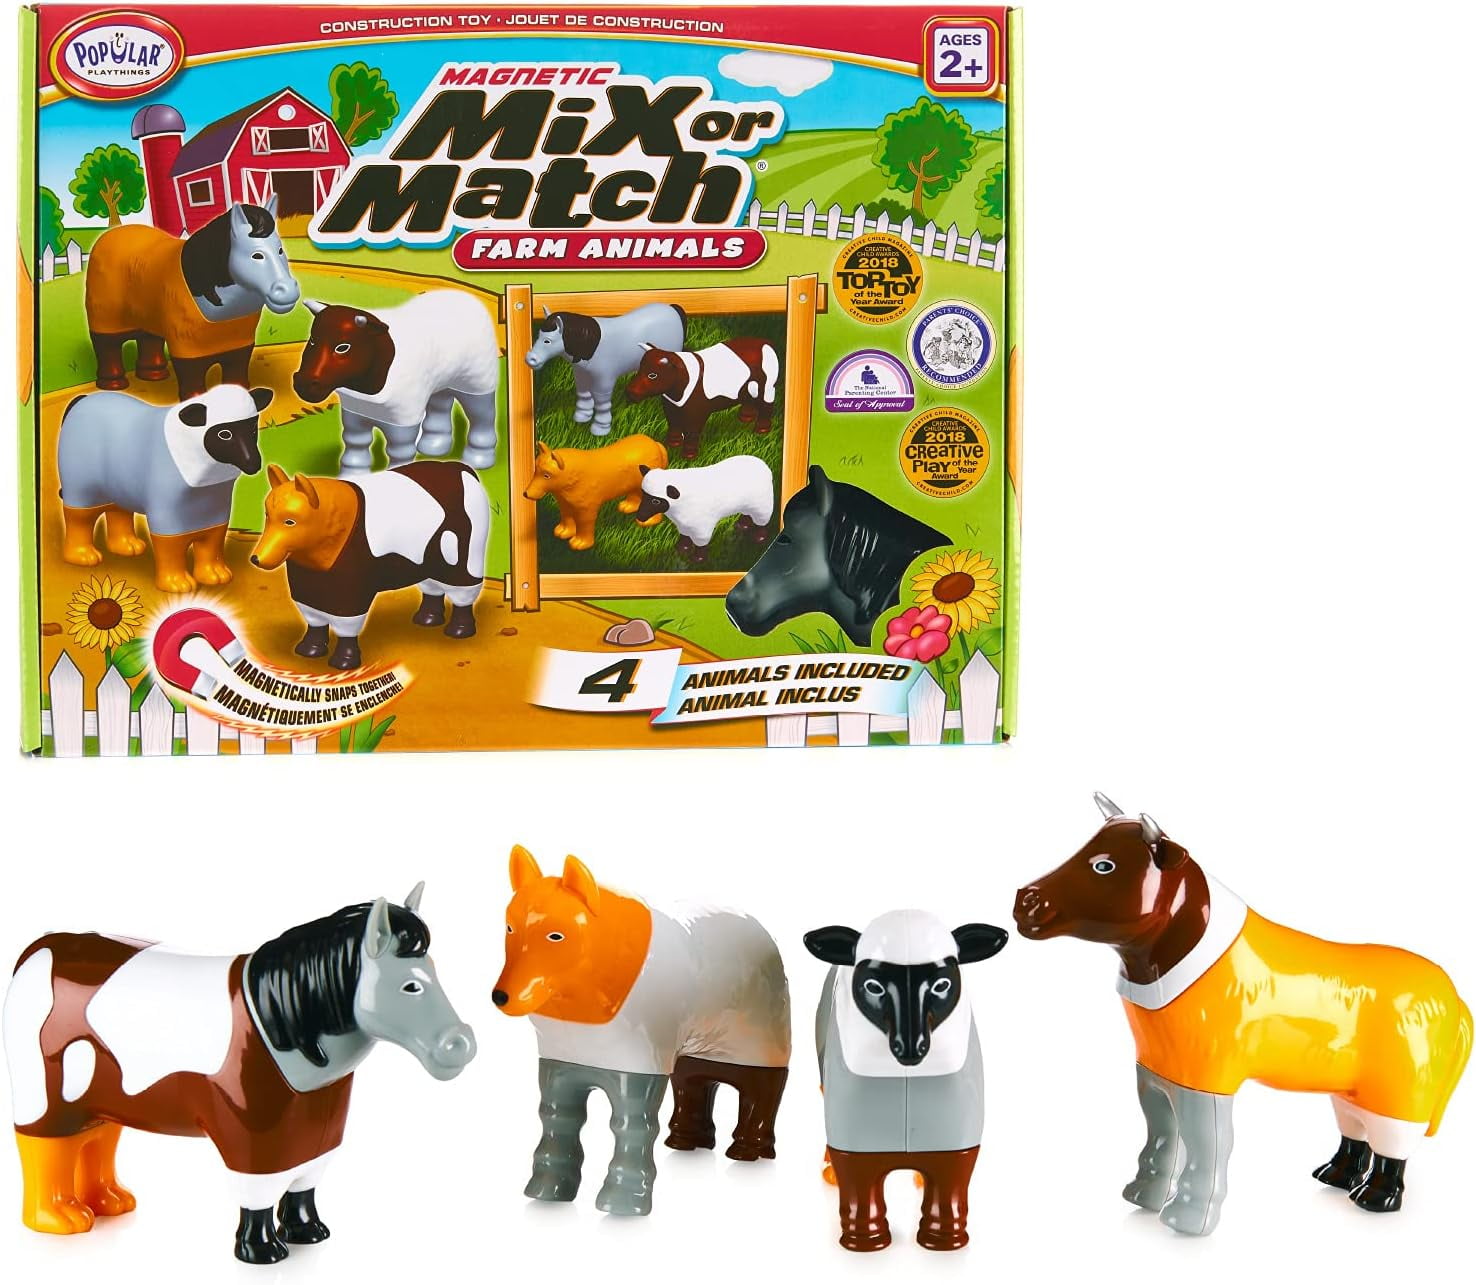 We Imagine on X: Look what we found! Teeny Tiny Mini Farm and Circus Play  Sets. They are so cute! How can so much fun be inside a little package?  You've just